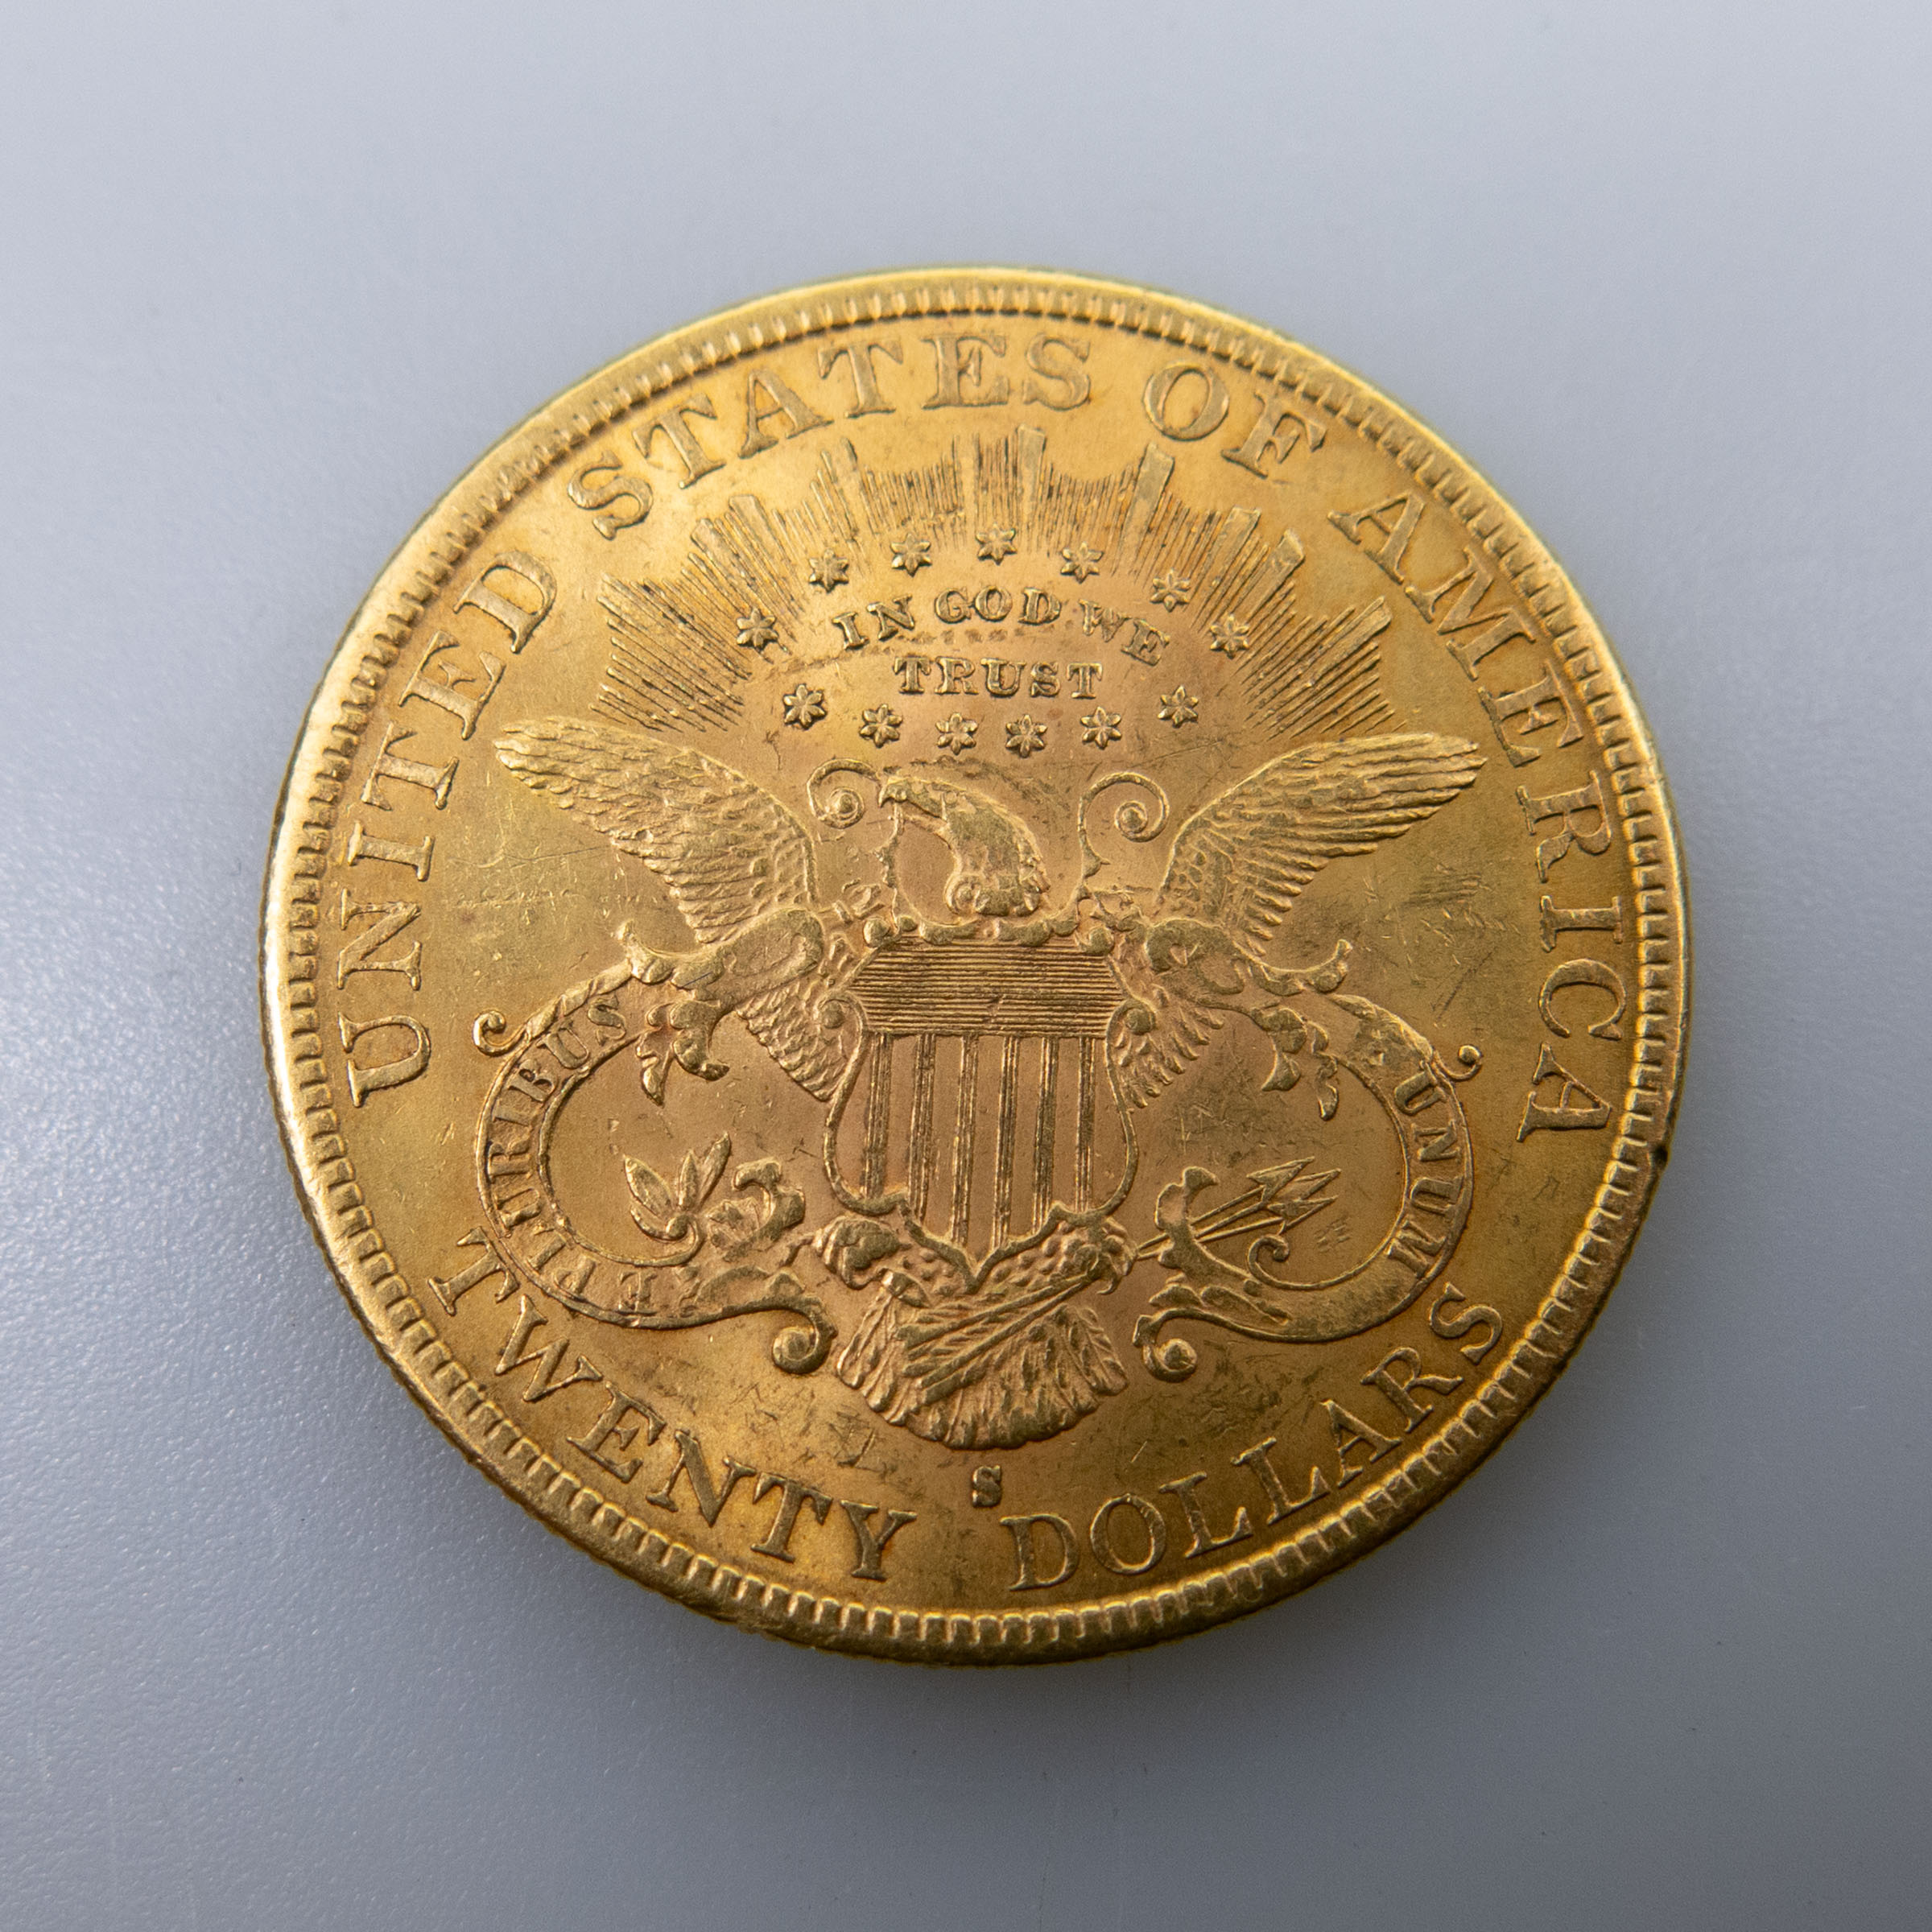 American 1893S $20 Double Eagle Gold Coin